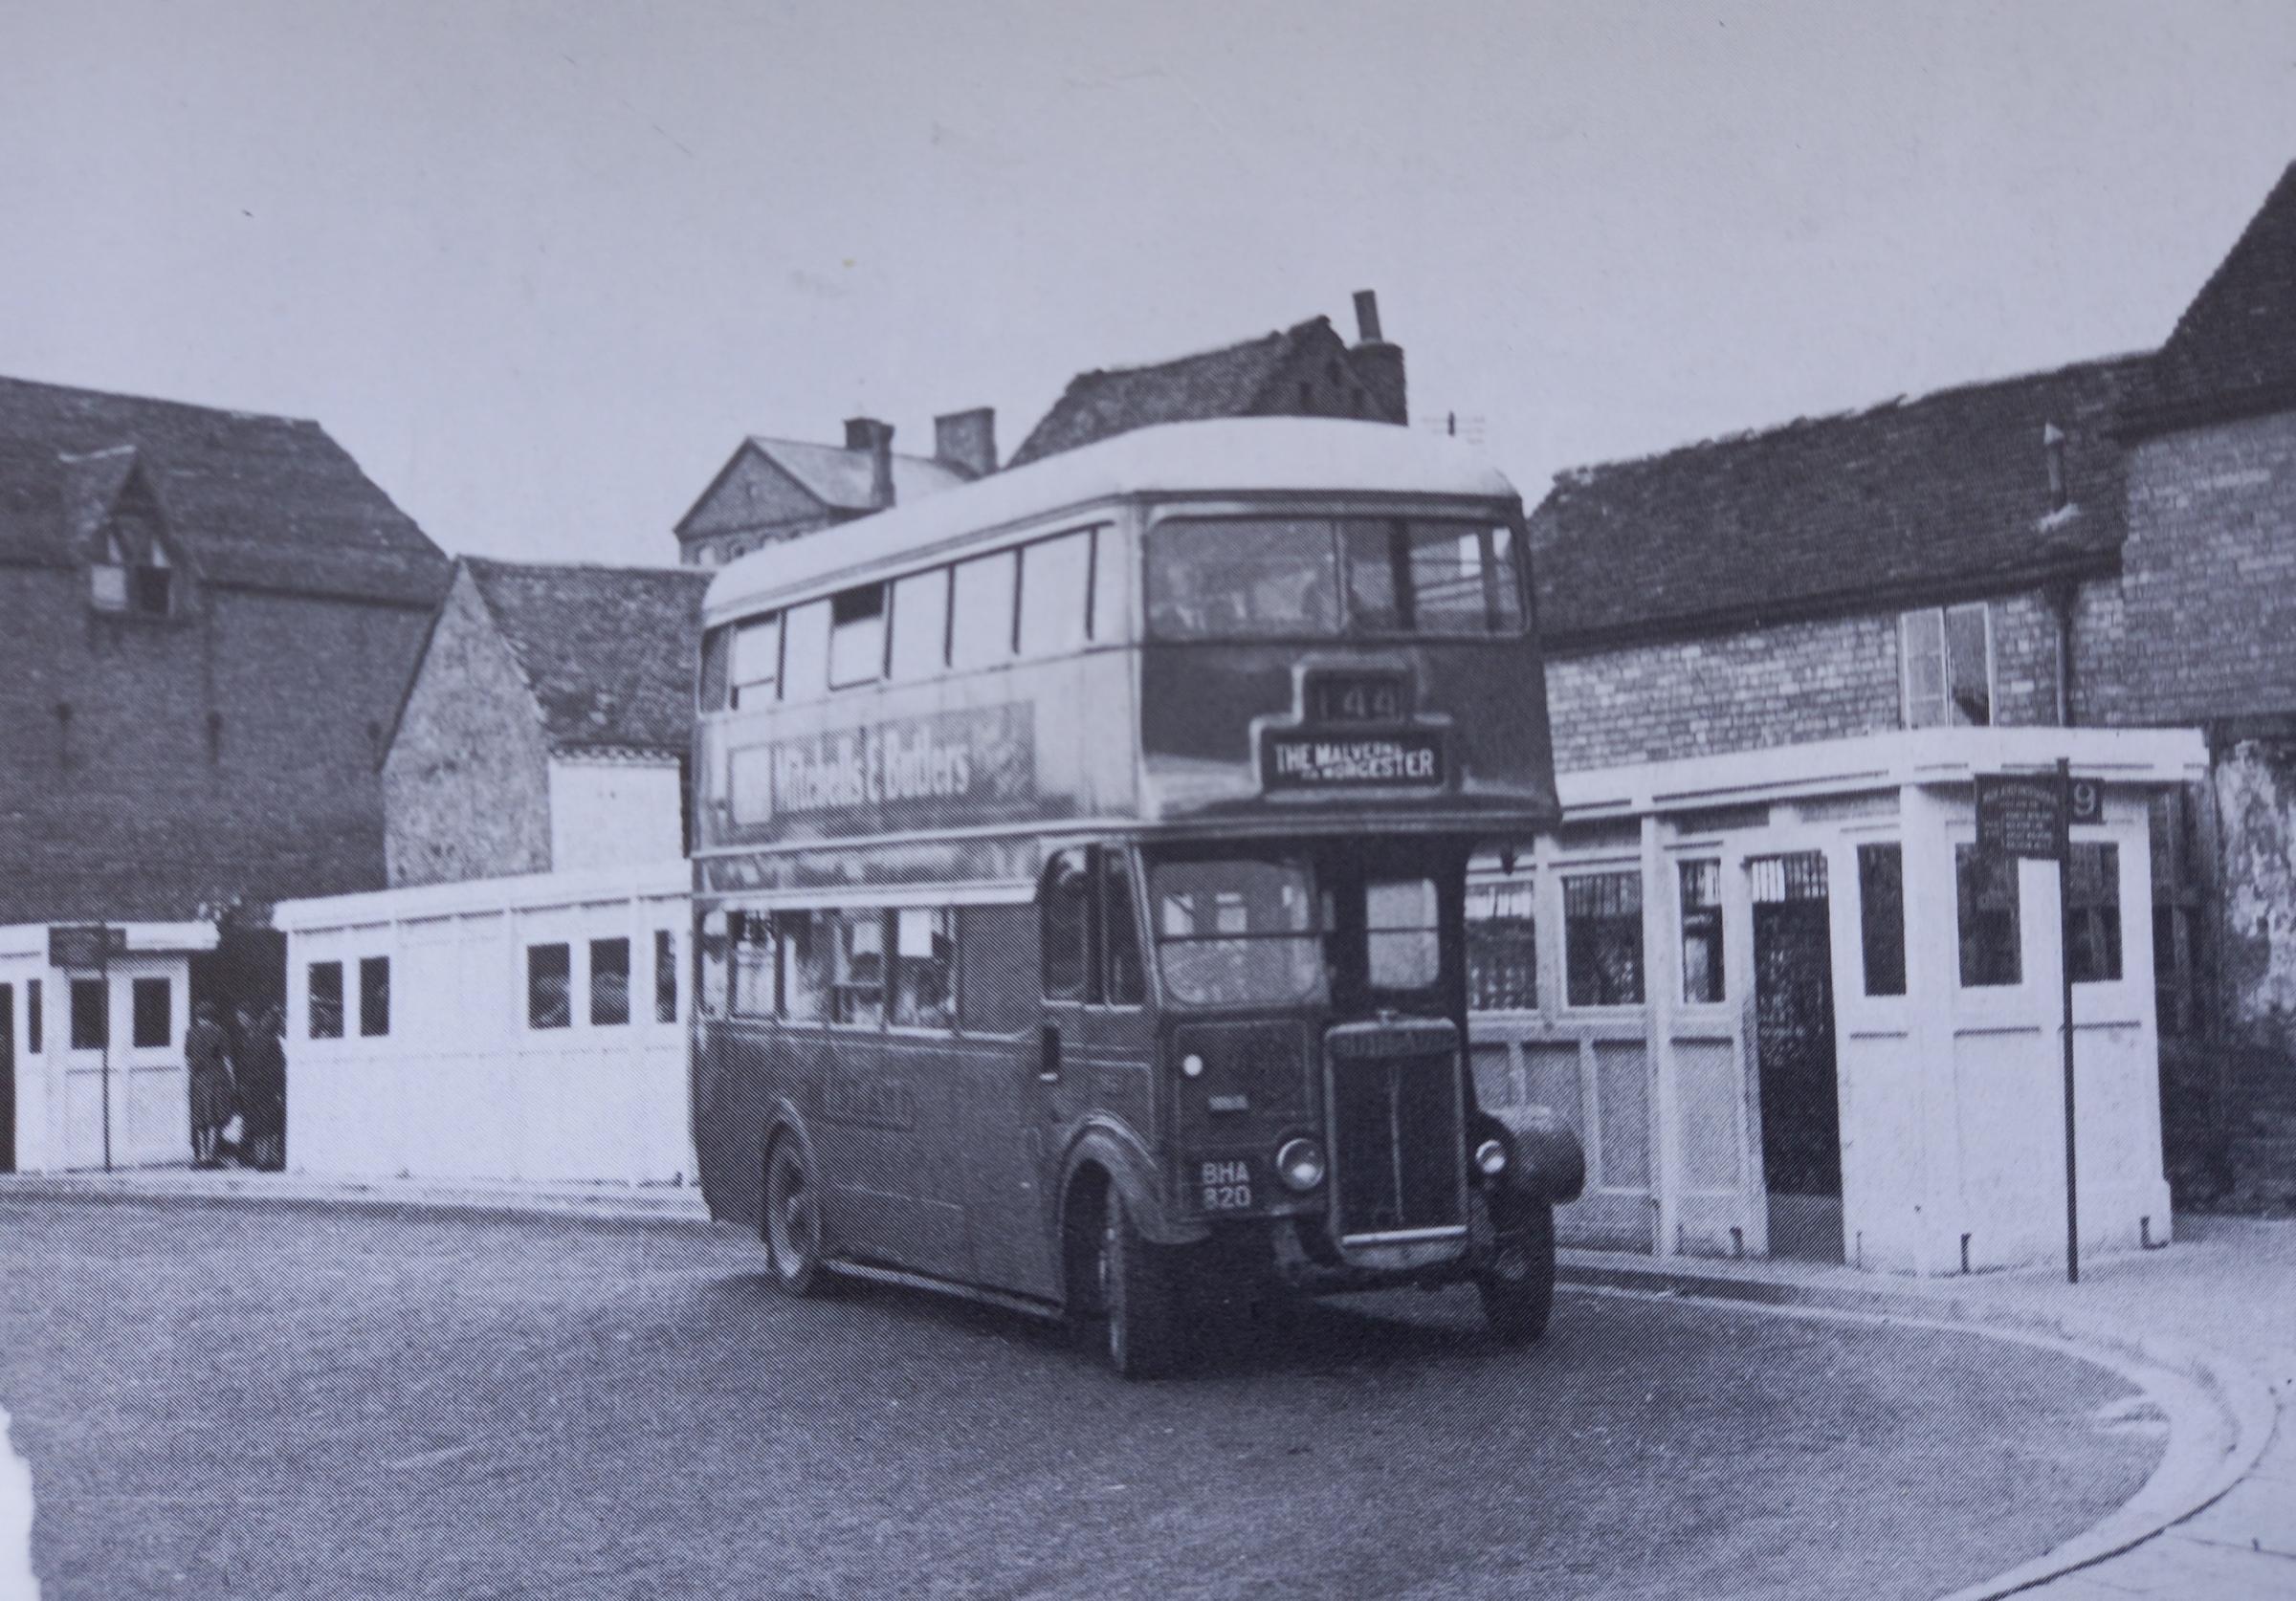 The good old 144 double decker waits at a Newport Street stand in 1949